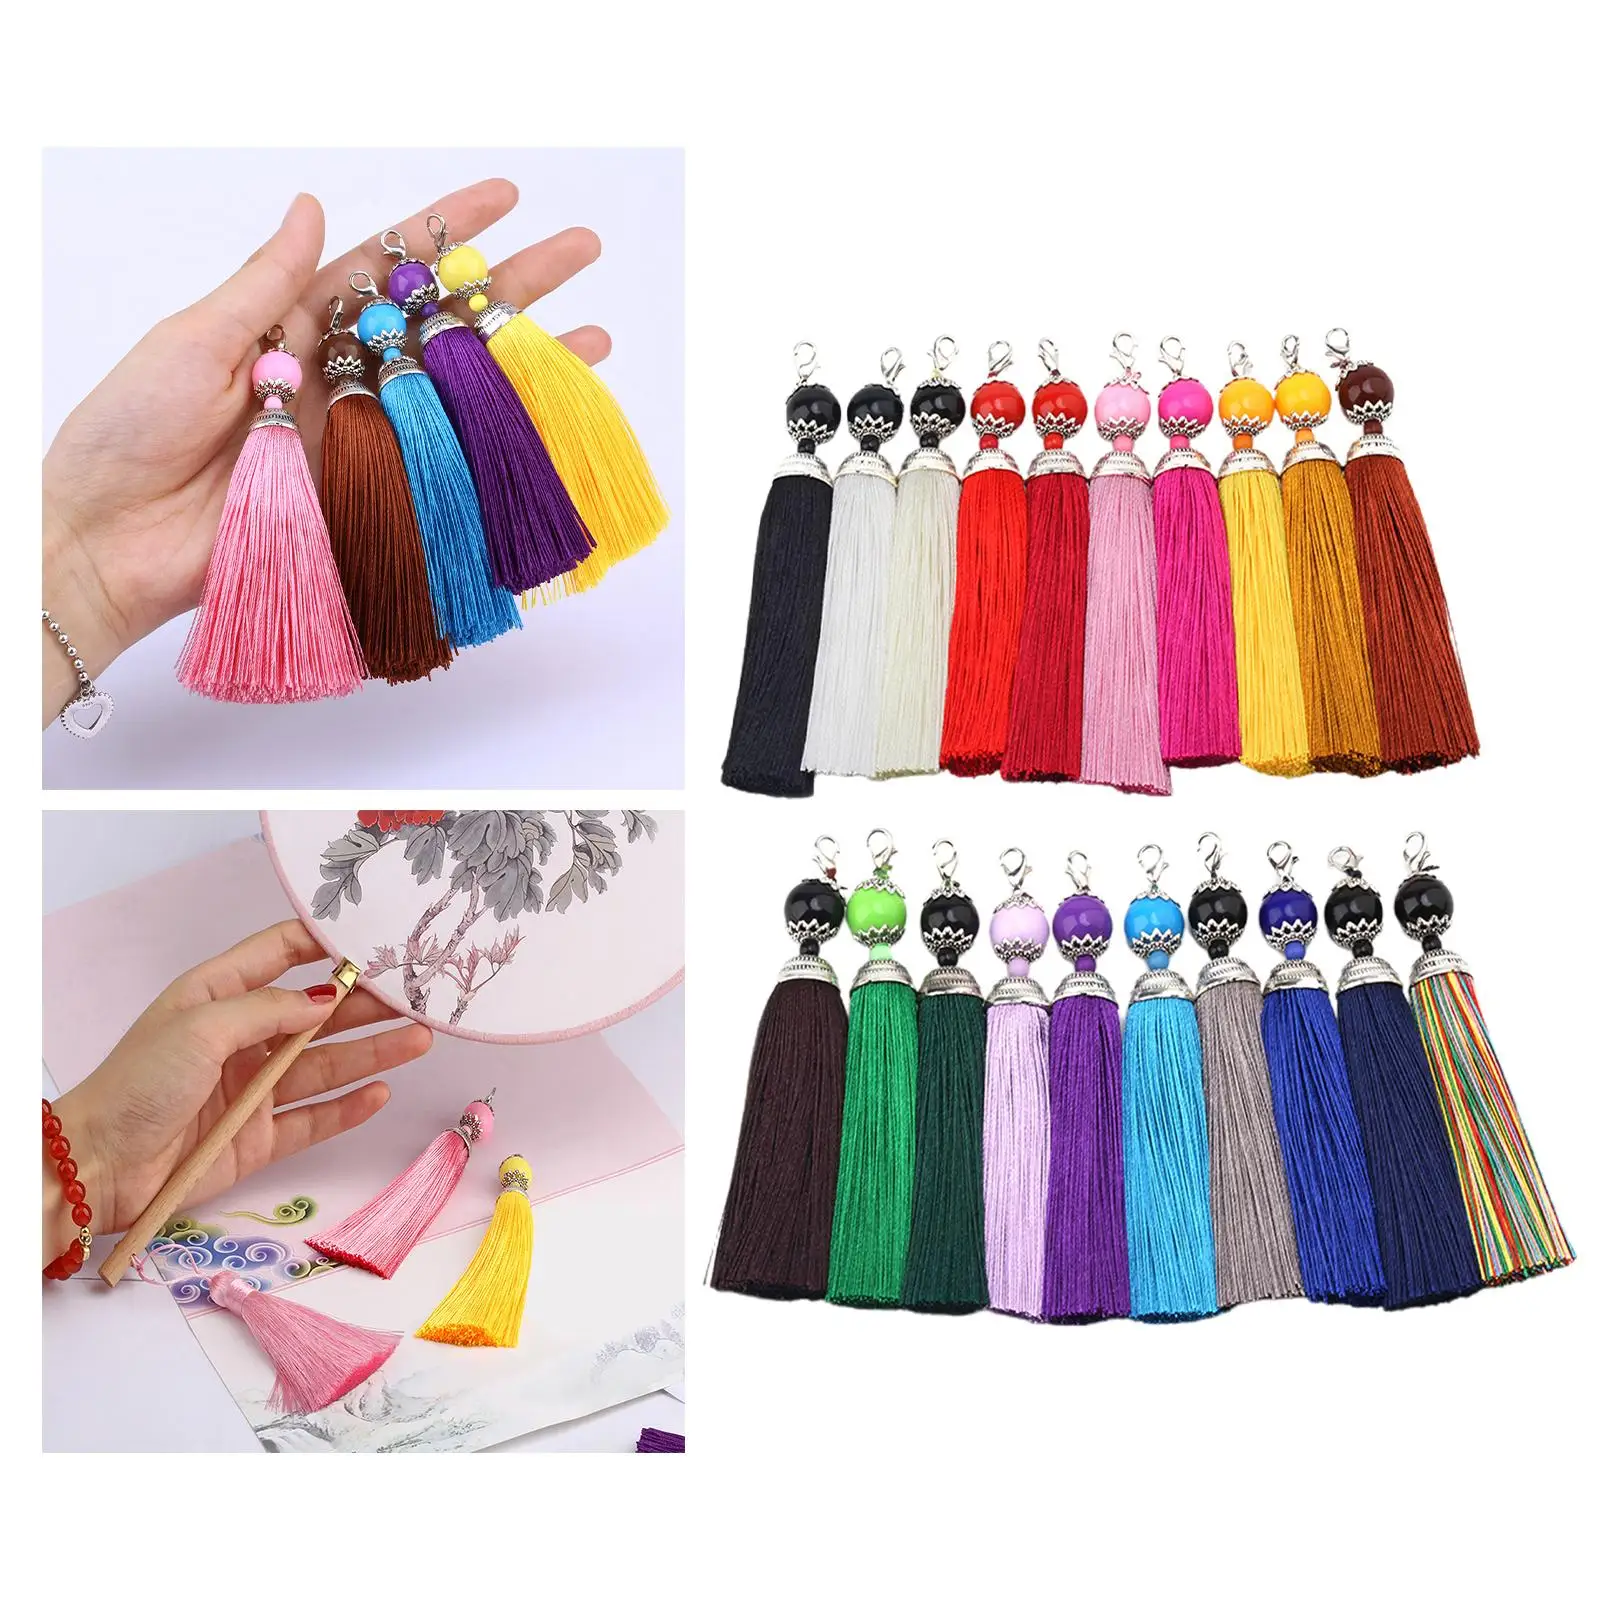 10x Tassels for Jewelry Making, with Lobster Buckle Decorative Decorative Tassels Keychain Tassel Charms for Necklaces Bracelets